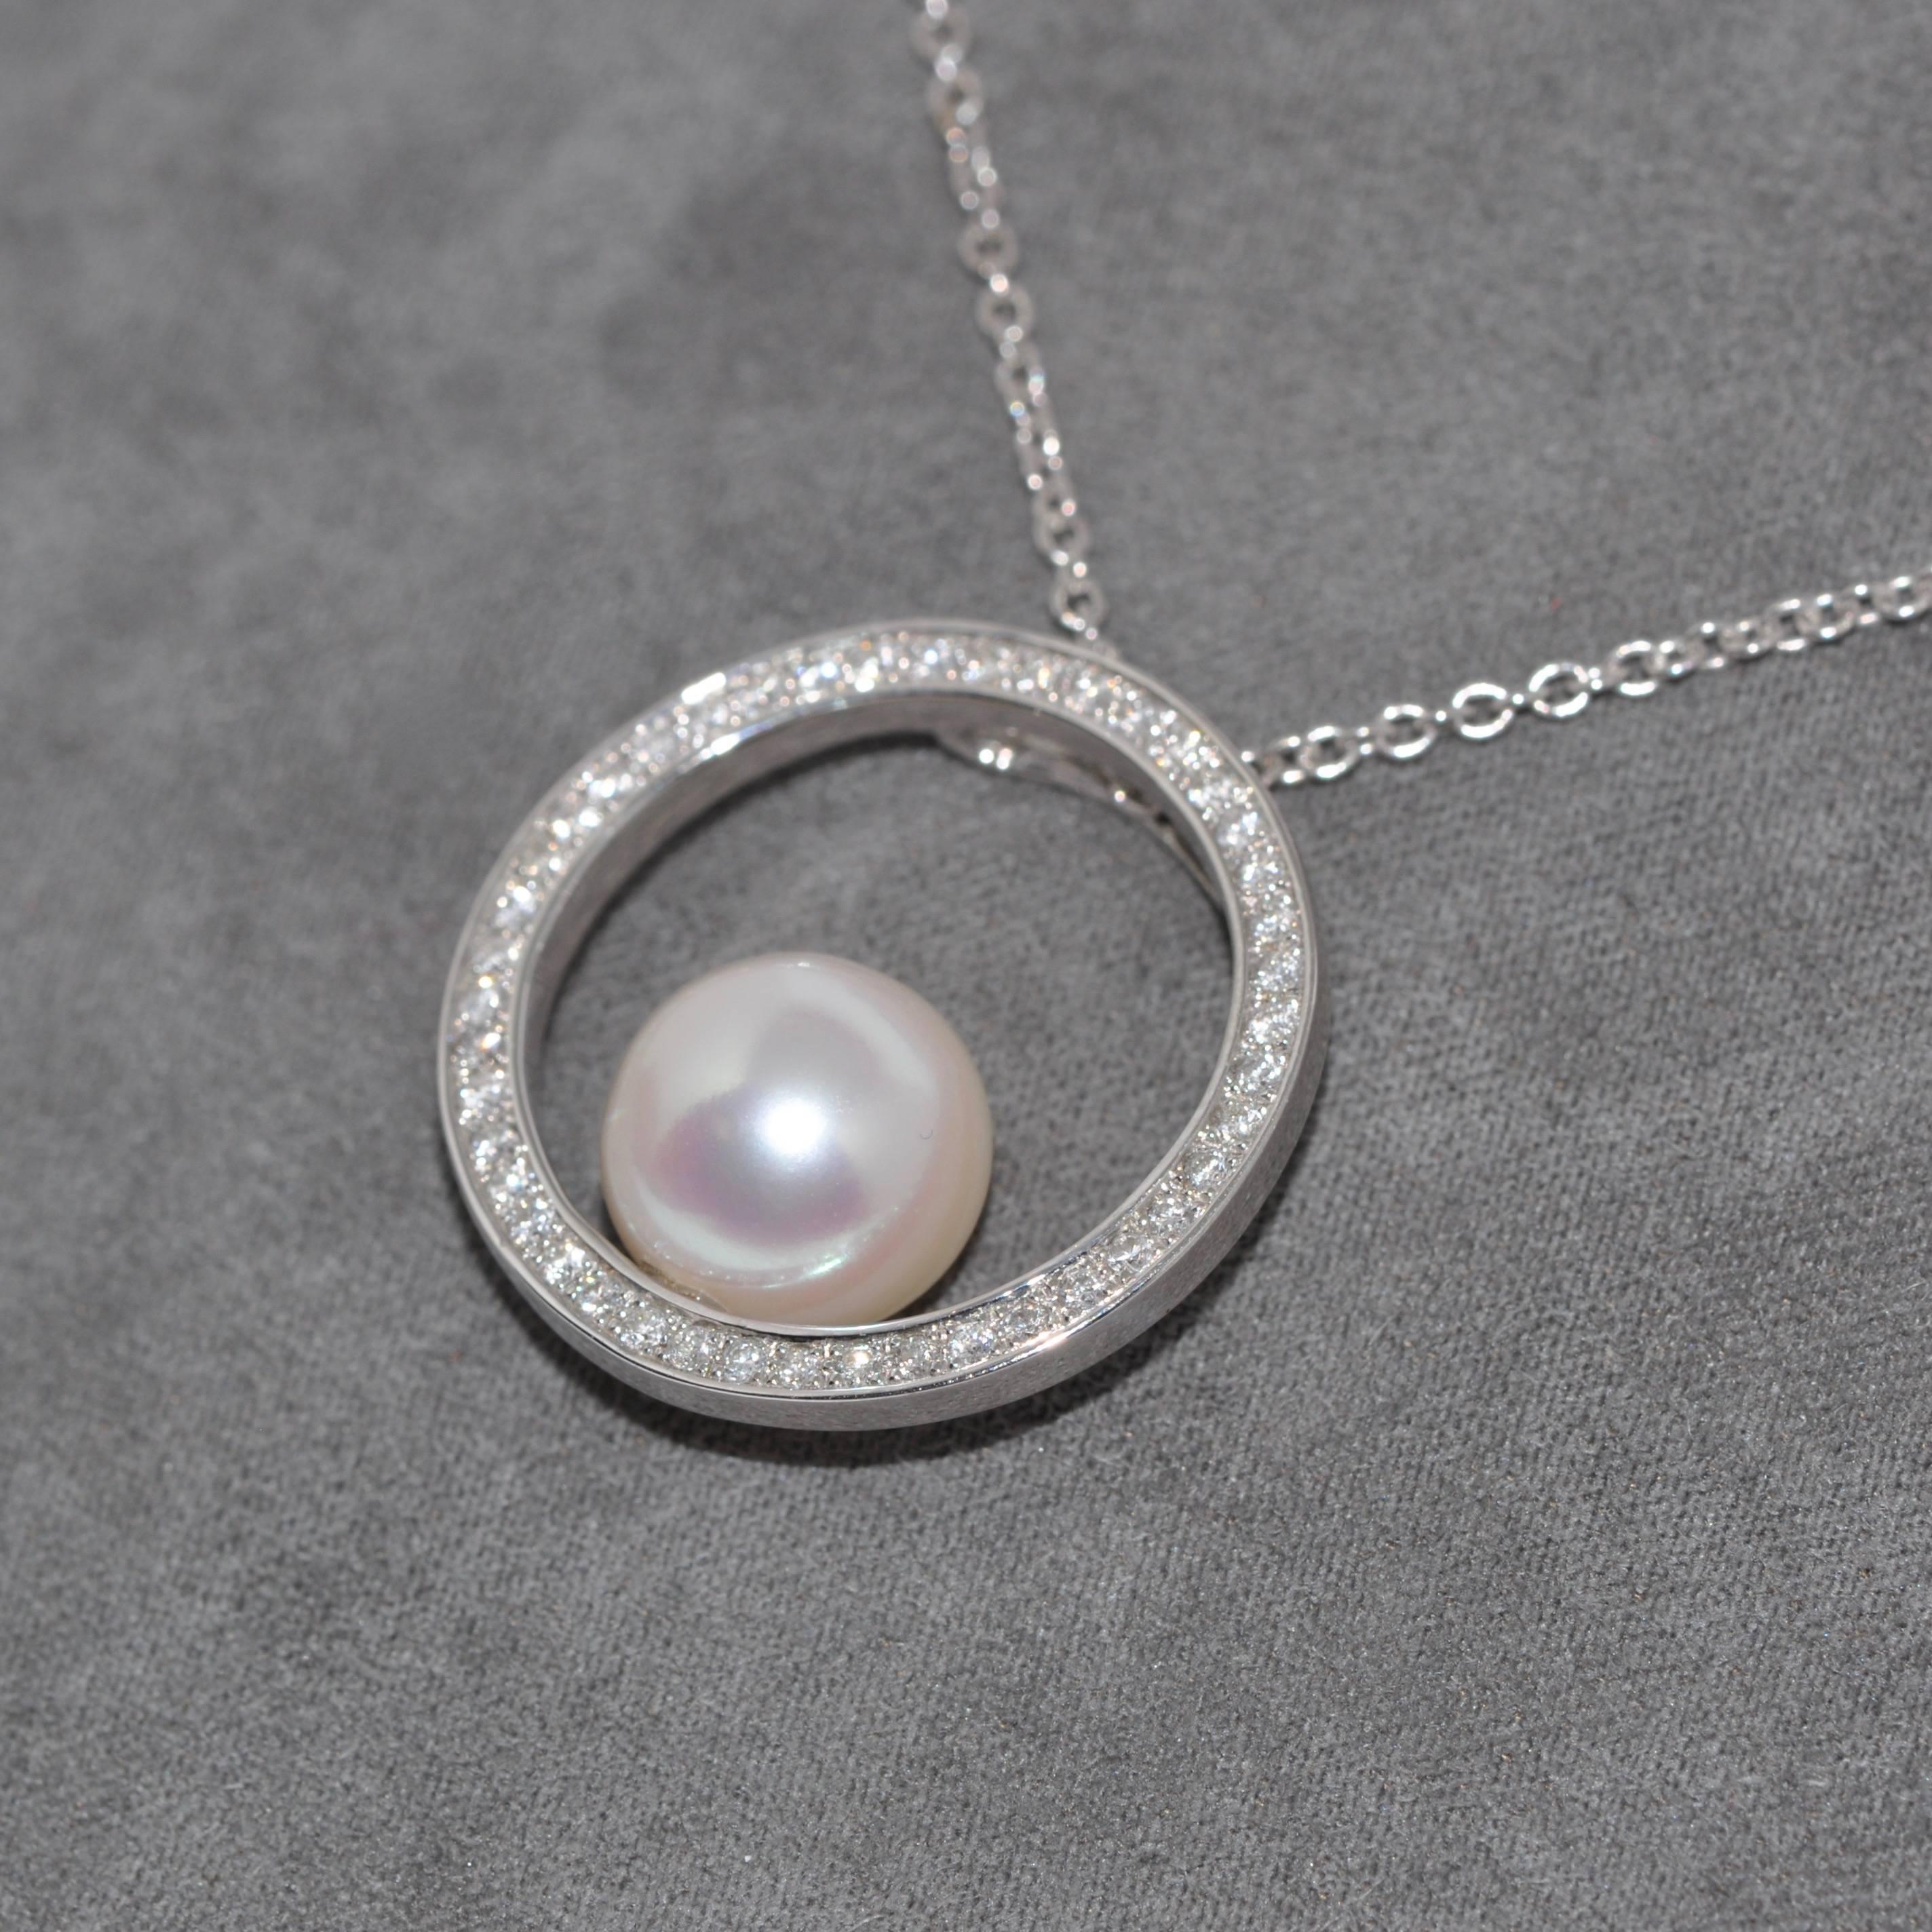 the perfect combination of the splendor of cultured pearls, the dazzling brilliance of white diamonds and the timeless elegance of white gold in this magnificent pendant necklace. Designed according to 1st Dibs' benchmark criteria, this exceptional